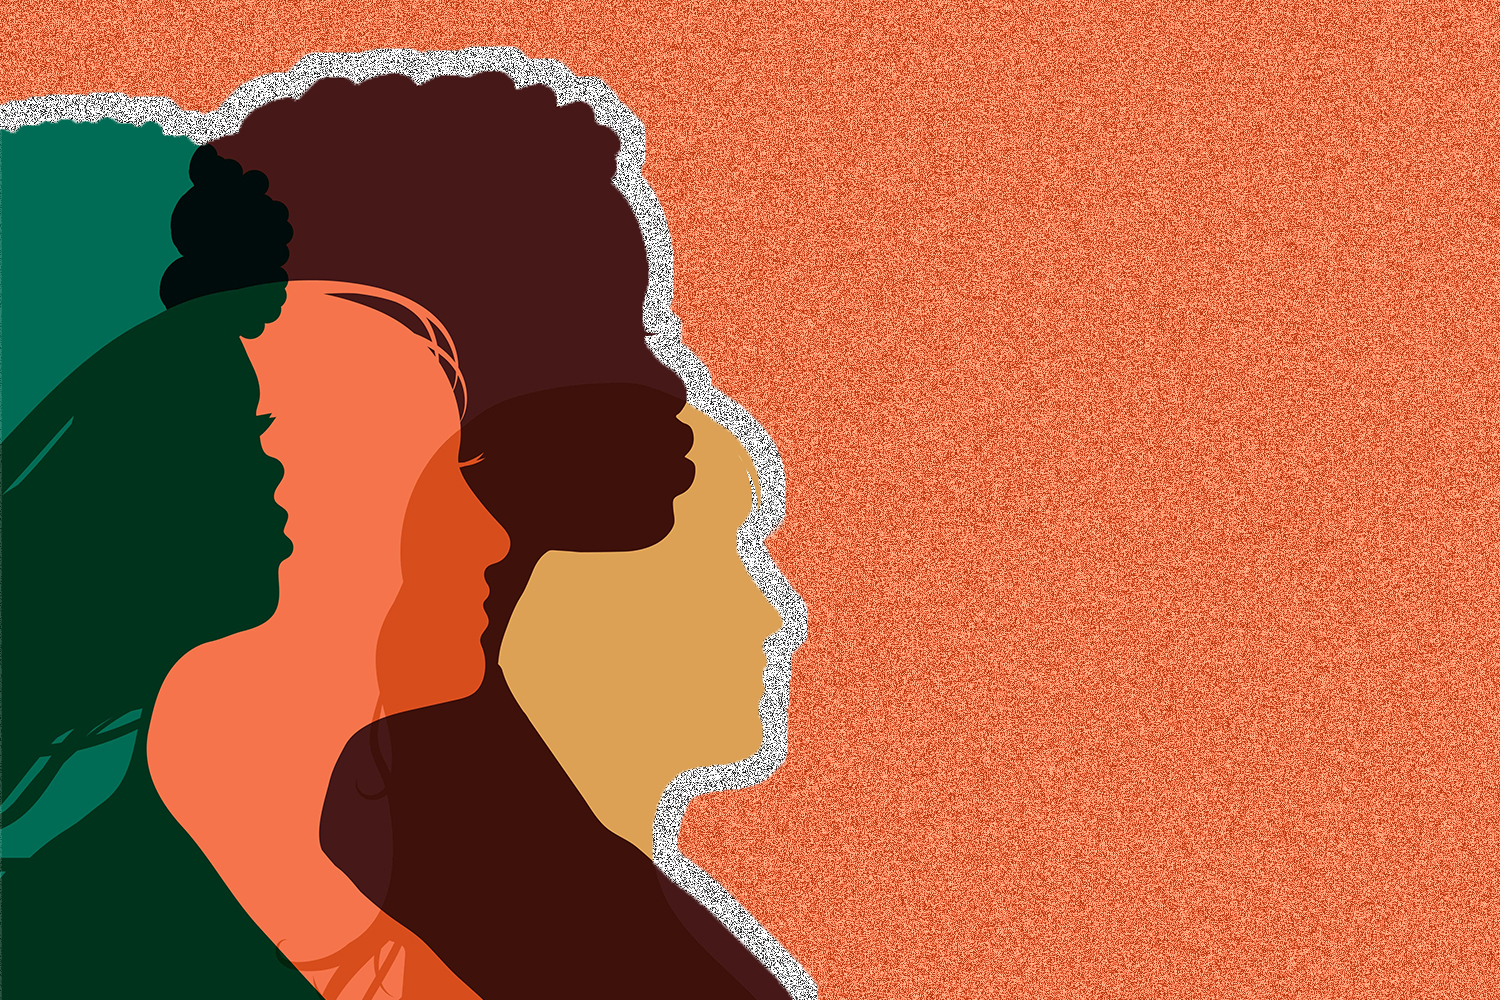 Green, peach, dark brown, and tan silhouetted outlines of women.